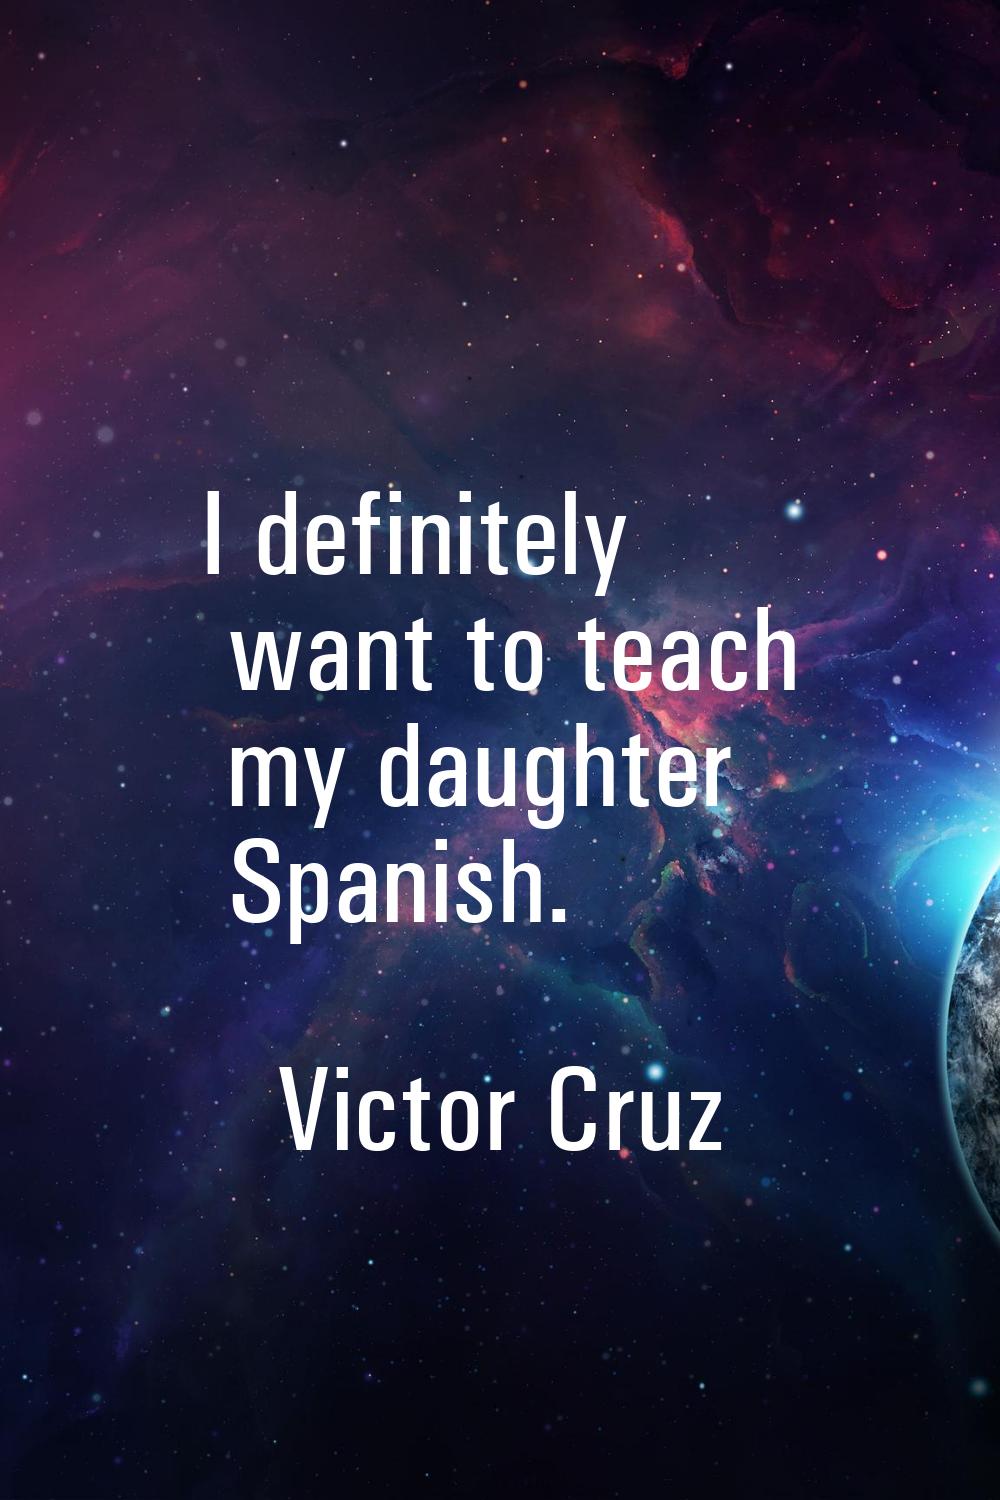 I definitely want to teach my daughter Spanish.